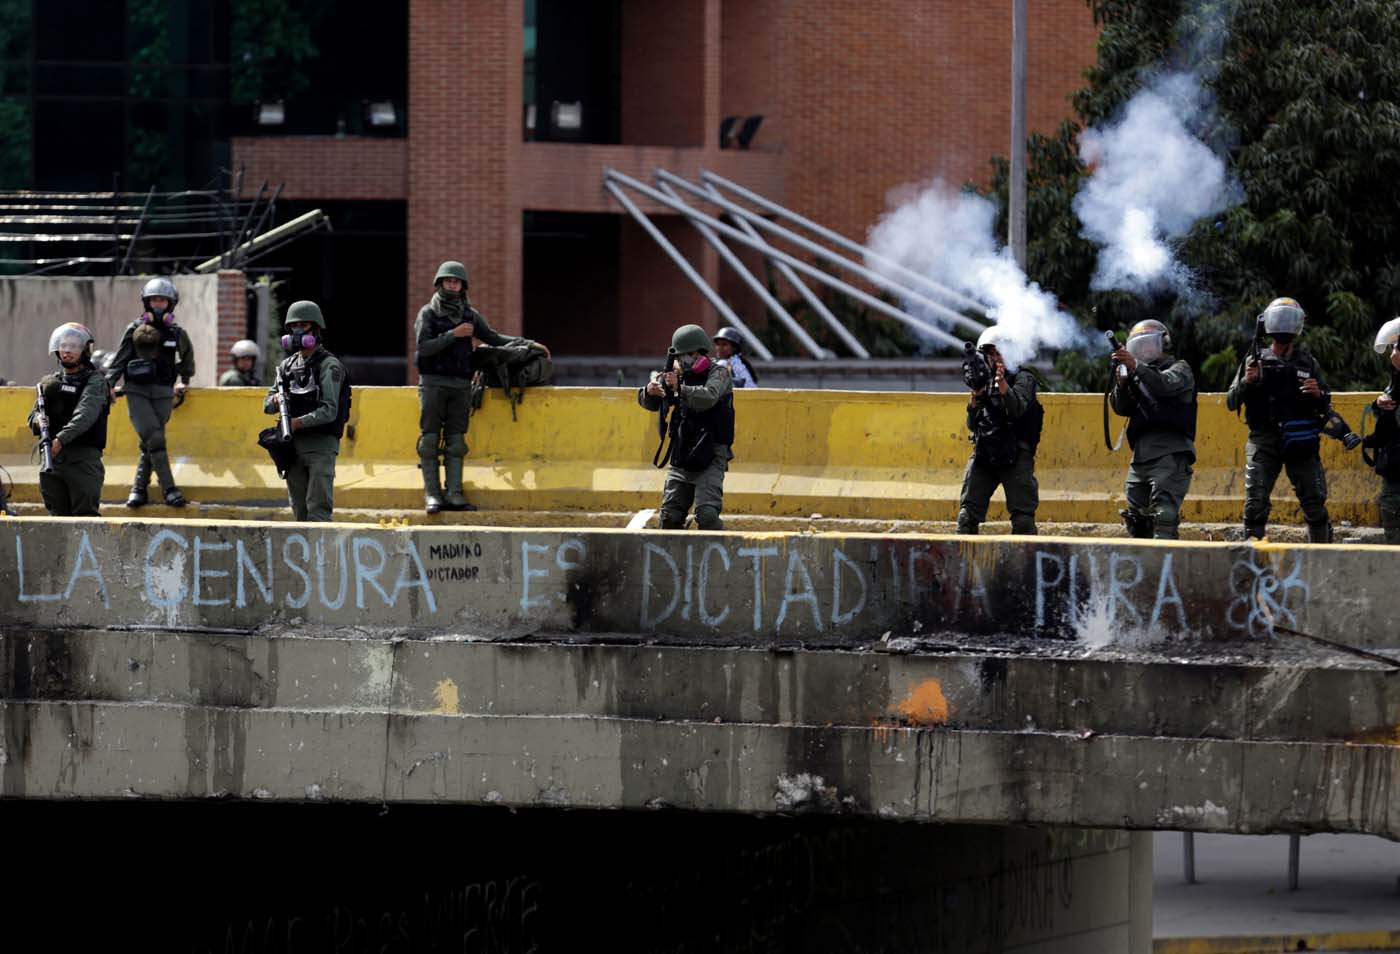 Security forces fire tear gas during clashes at a rally against Venezuelan President Nicolas Maduro's government in Caracas, Venezuela, July 6, 2017. The grafitti below them reads "Censorship is pure dictatorship". REUTERS/Marco Bello